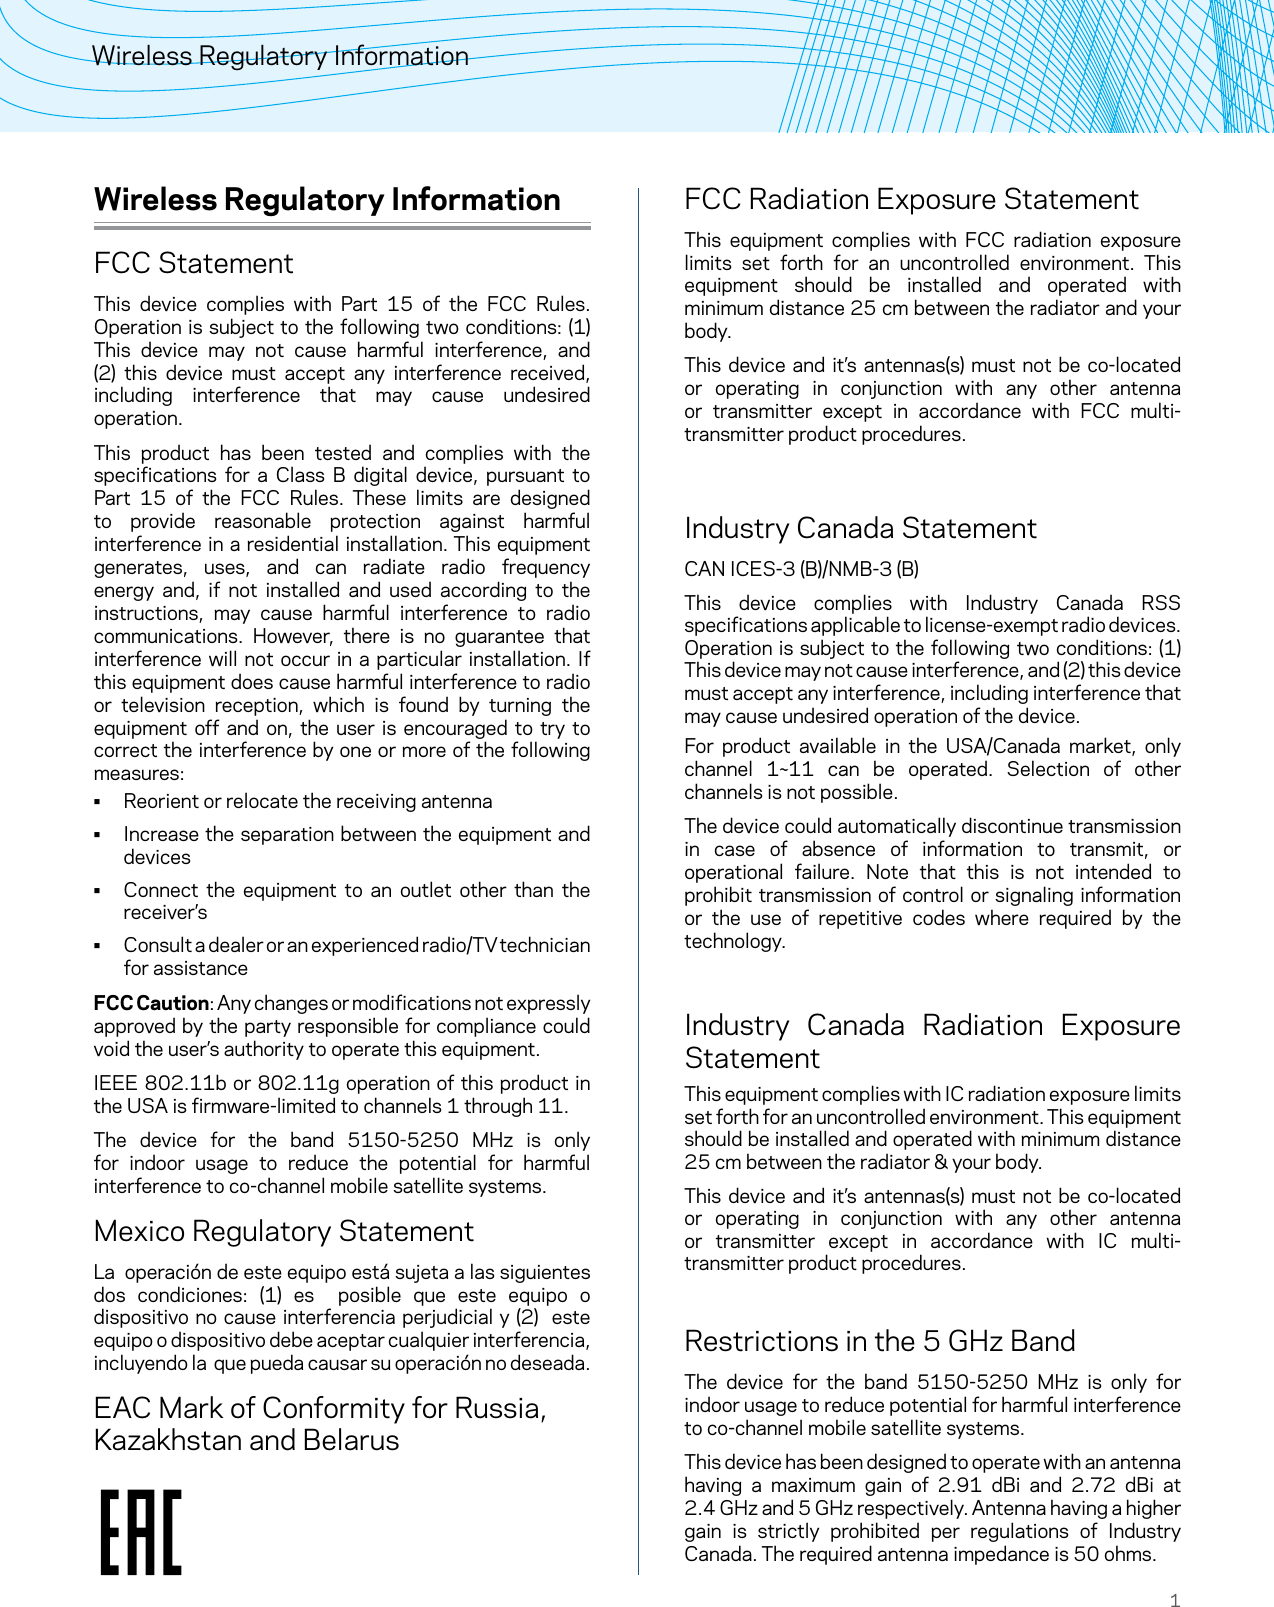 1Wireless Regulatory InformationWireless Regulatory InformationFCC StatementThis device complies with Part 15 of the FCC Rules. Operation is subject to the following two conditions: (1) This device may not cause harmful interference, and (2) this device must accept any interference received, including interference that may cause undesired operation.This product has been tested and complies with the specifications for a Class B digital device, pursuant to Part 15 of the FCC Rules. These limits are designed to provide reasonable protection against harmful interference in a residential installation. This equipment generates, uses, and can radiate radio frequency energy and, if not installed and used according to the instructions, may cause harmful interference to radio communications. However, there is no guarantee that interference will not occur in a particular installation. If this equipment does cause harmful interference to radio or television reception, which is found by turning the equipment off and on, the user is encouraged to try to correct the interference by one or more of the following measures: • Reorient or relocate the receiving antenna • Increase the separation between the equipment and devices • Connect the equipment to an outlet other than the receiver’s • Consult a dealer or an experienced radio/TV technician for assistanceFCC Caution: Any changes or modifications not expressly approved by the party responsible for compliance could void the user’s authority to operate this equipment.IEEE 802.11b or 802.11g operation of this product in the USA is firmware-limited to channels 1 through 11.The device for the band 5150-5250 MHz is only for indoor usage to reduce the potential for harmful interference to co-channel mobile satellite systems.Mexico Regulatory StatementLa  operación de este equipo está sujeta a las siguientes dos condiciones: (1) es  posible que este equipo o dispositivo no cause interferencia perjudicial y (2)  este equipo o dispositivo debe aceptar cualquier interferencia, incluyendo la  que pueda causar su operación no deseada.EAC Mark of Conformity for Russia, Kazakhstan and BelarusFCC Radiation Exposure StatementThis equipment complies with FCC radiation exposure limits set forth for an uncontrolled environment. This equipment should be installed and operated with minimum distance 25 cm between the radiator and your body.This device and it’s antennas(s) must not be co-located or operating in conjunction with any other antenna or transmitter except in accordance with FCC multi-transmitter product procedures. Industry Canada StatementCAN ICES-3 (B)/NMB-3 (B)This device complies with Industry Canada RSS specifications applicable to license-exempt radio devices. Operation is subject to the following two conditions: (1) This device may not cause interference, and (2) this device must accept any interference, including interference that may cause undesired operation of the device.For product available in the USA/Canada market, only channel 1~11 can be operated. Selection of other channels is not possible.The device could automatically discontinue transmission in case of absence of information to transmit, or operational failure. Note that this is not intended to prohibit transmission of control or signaling information or the use of repetitive codes where required by the technology.Industry Canada Radiation Exposure StatementThis equipment complies with IC radiation exposure limits set forth for an uncontrolled environment. This equipment should be installed and operated with minimum distance 25 cm between the radiator &amp; your body.This device and it’s antennas(s) must not be co-located or operating in conjunction with any other antenna or transmitter except in accordance with IC multi-transmitter product procedures.Restrictions in the 5 GHz BandThe device for the band 5150-5250 MHz is only for indoor usage to reduce potential for harmful interference to co-channel mobile satellite systems.This device has been designed to operate with an antenna having a maximum gain of 2.91 dBi and 2.72 dBi at  2.4 GHz and 5 GHz respectively. Antenna having a higher gain is strictly prohibited per regulations of Industry Canada. The required antenna impedance is 50 ohms.